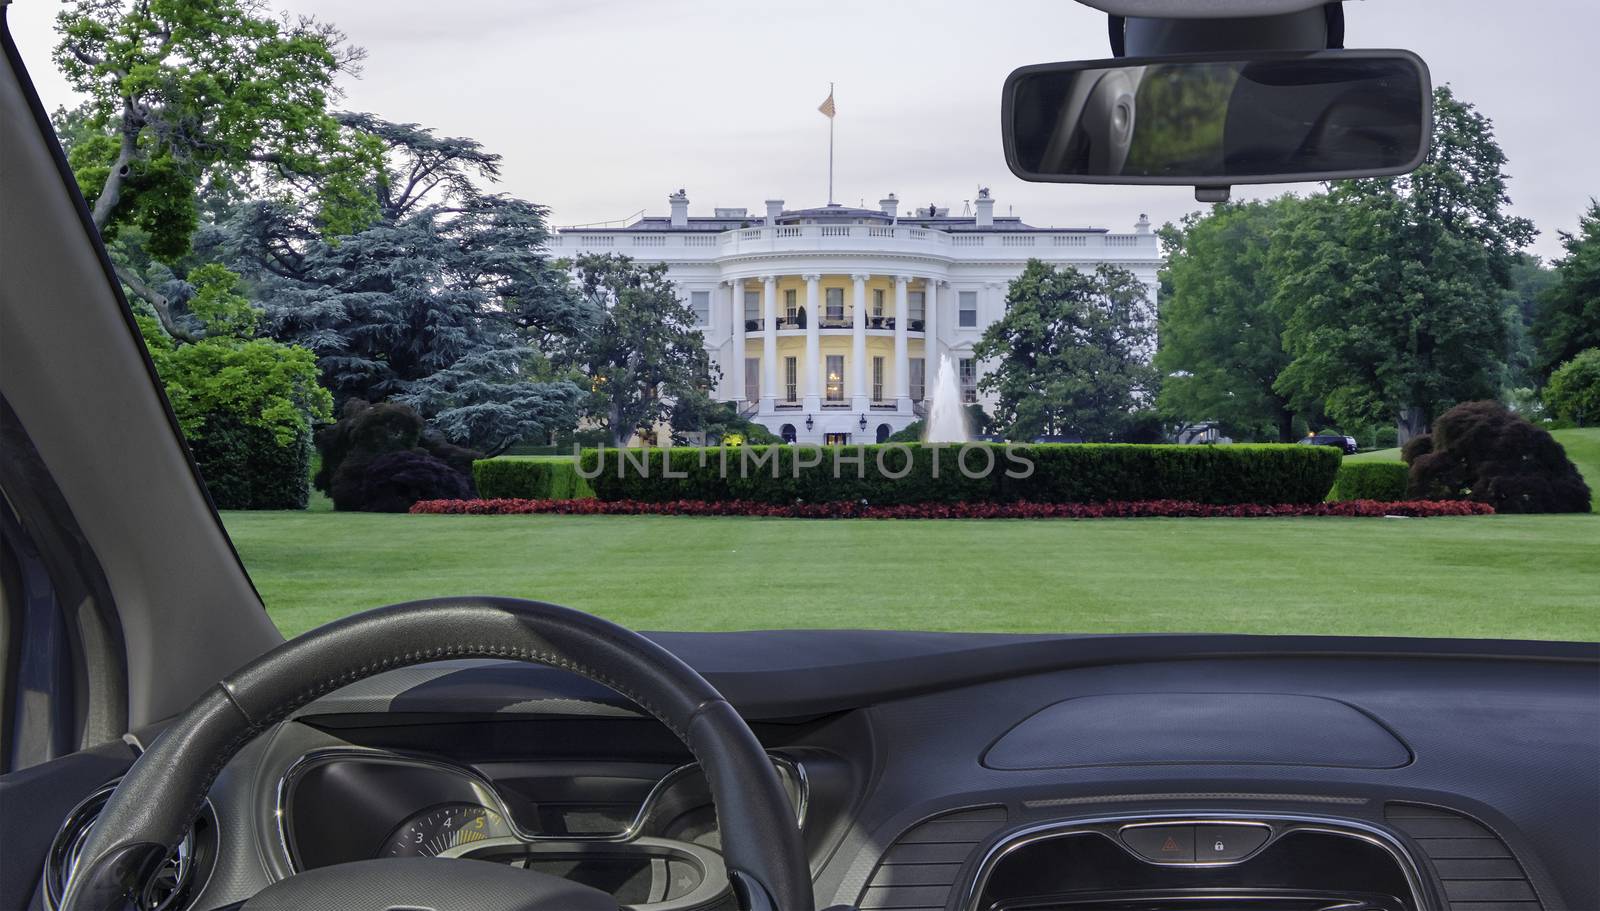 Looking through a car windshield with view of the White House, Washington DC, USA